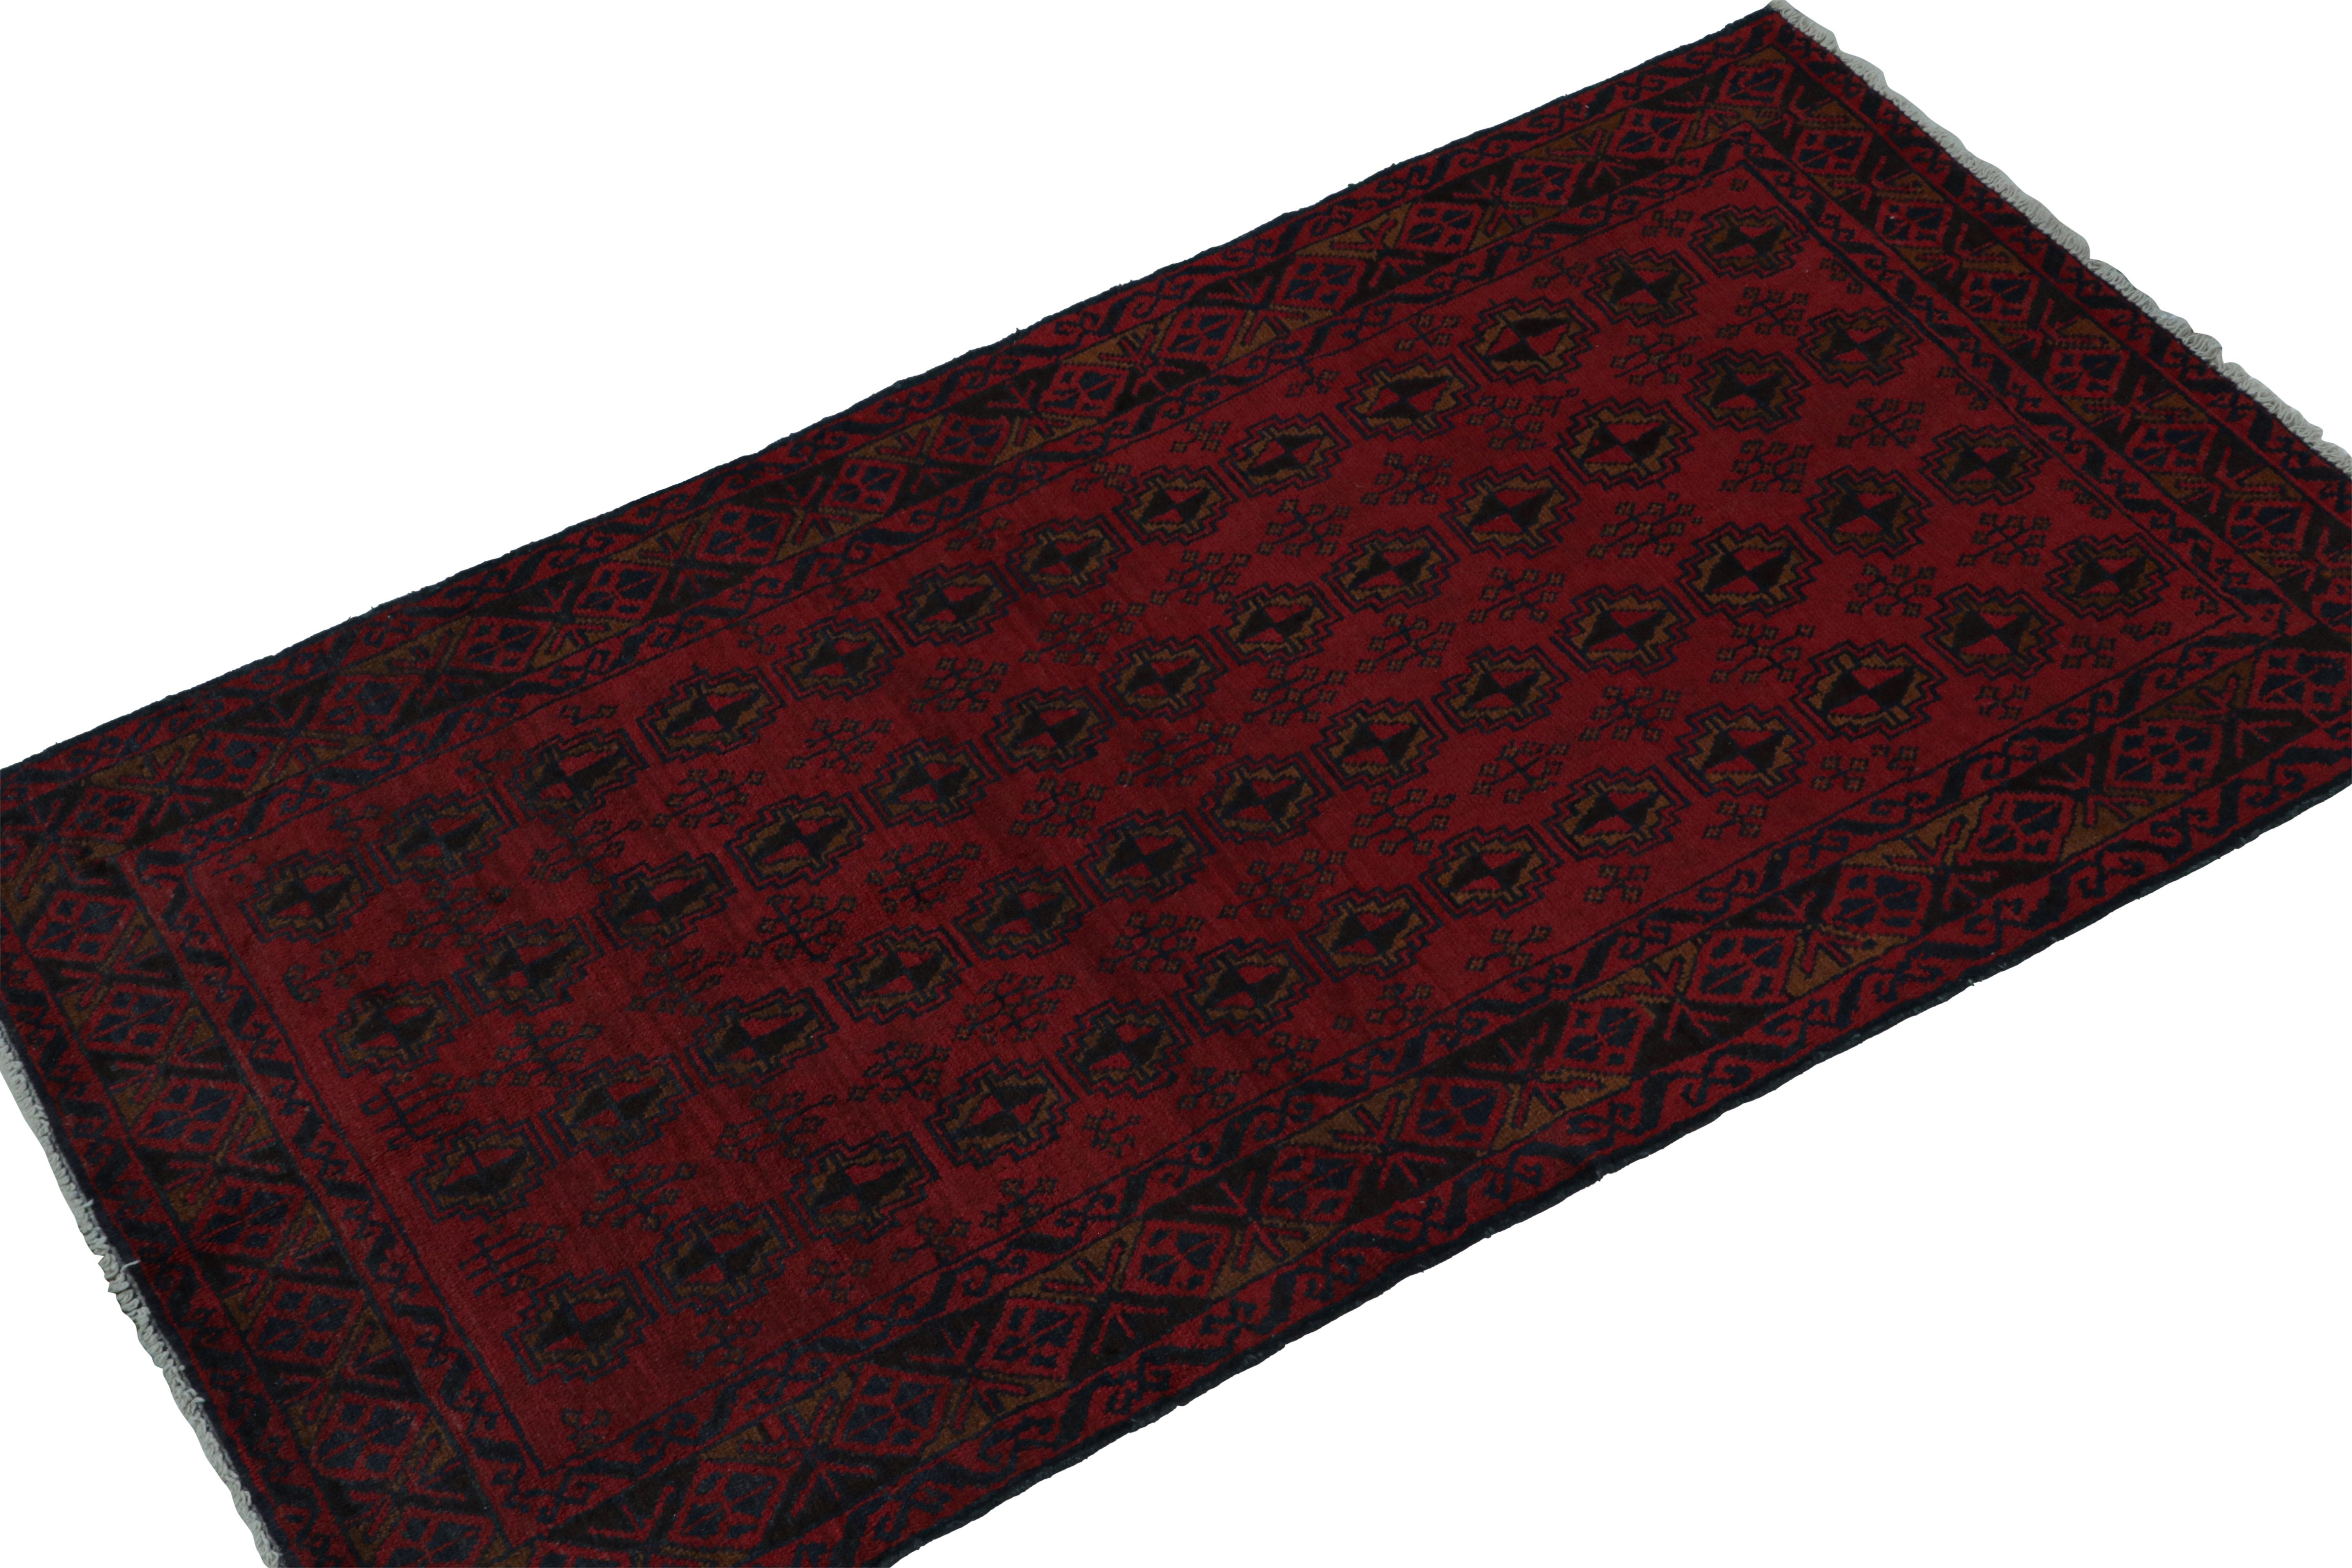 Hand-knotted in wool & goat hair, this vintage tribal runner of the 1950s is a coveted addition to Rug & Kilim’s Antique & Vintage collection. 

On the Design: 

Coming from the Baluch tribe, this 3x6 runner boasts traditional patterns in rich red &